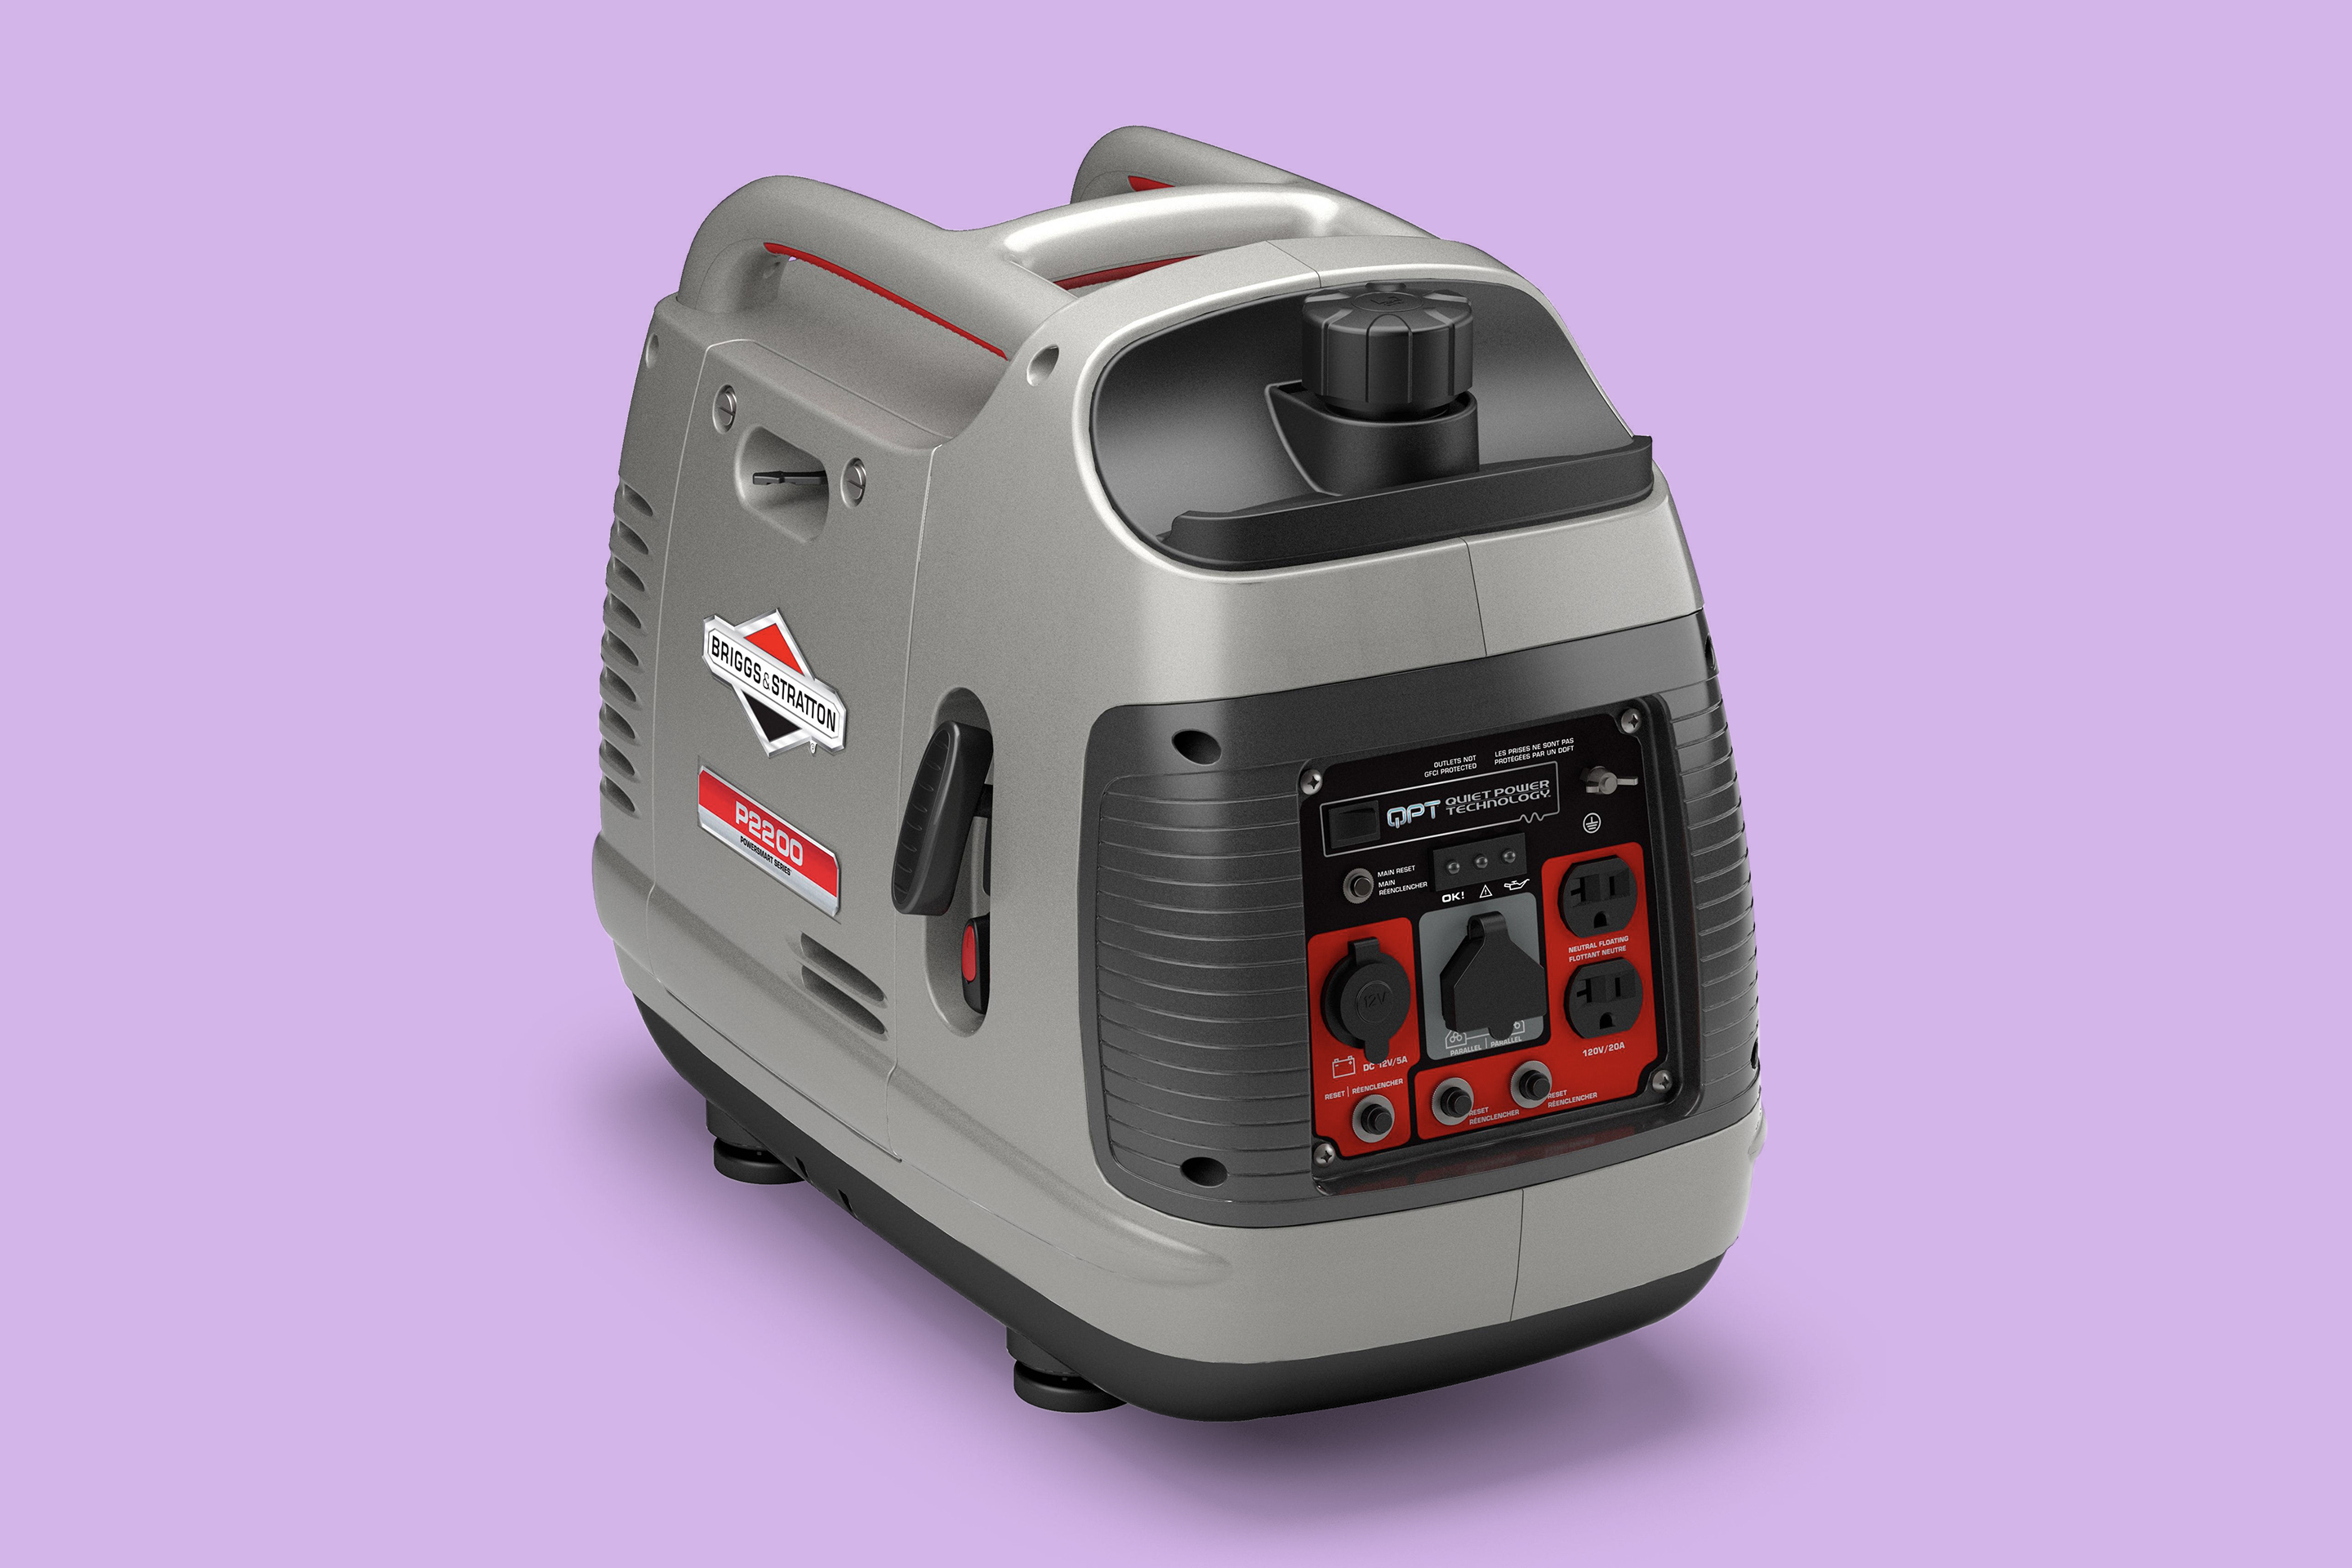 Briggs and Stratton gray inverter power generator in front of a purple background